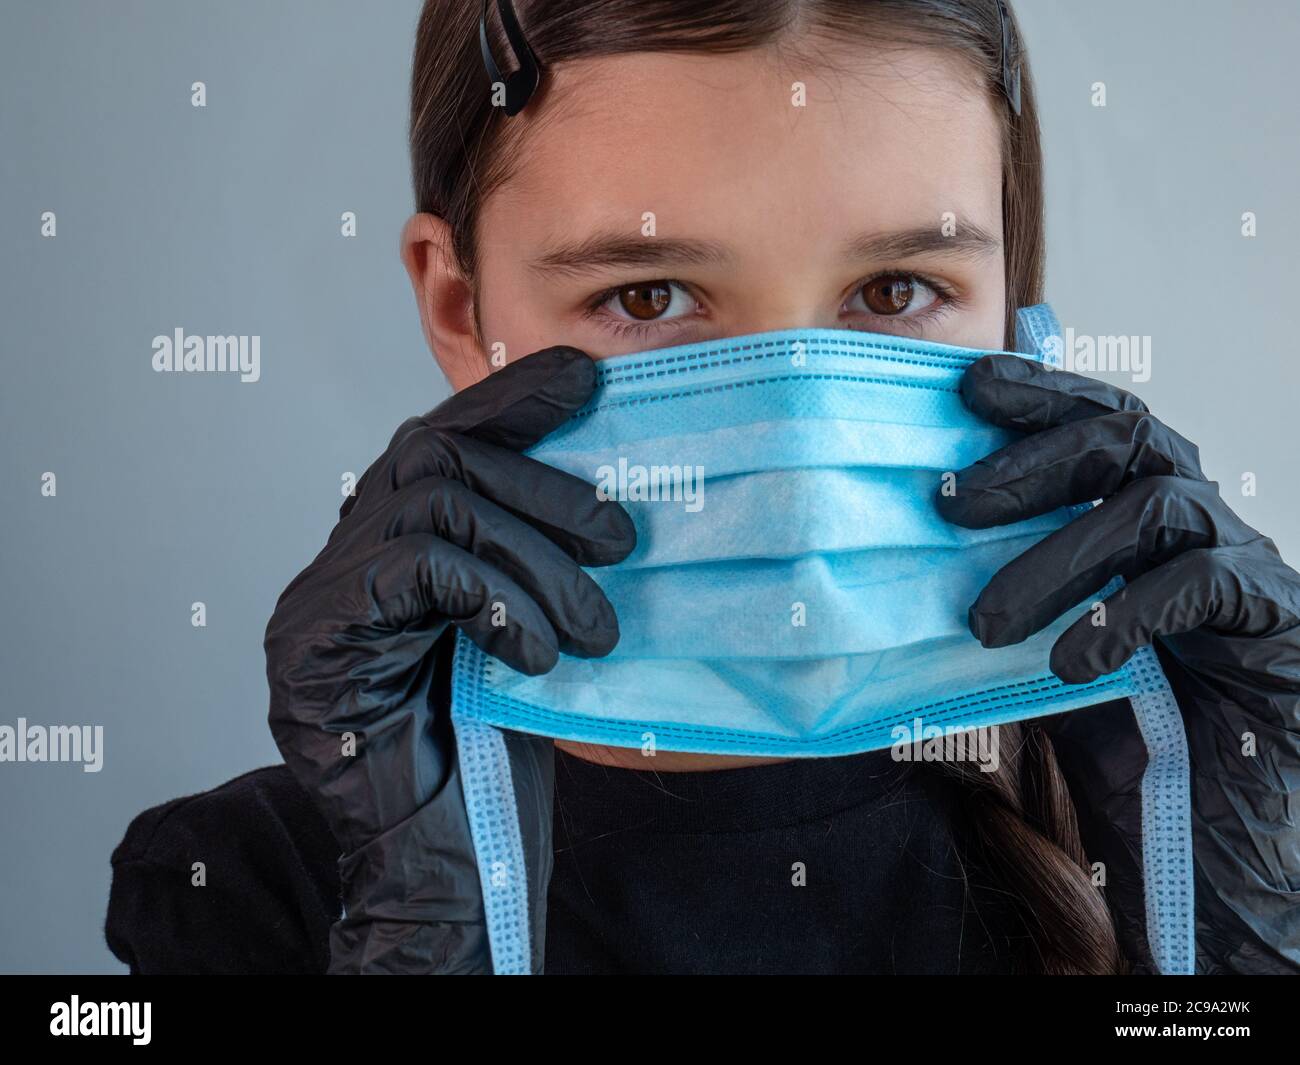 Female teenage girl in black latex gloves holding and fitting on a blue protective medical face mask. Eyes closed. Antiviral protection during covid. Stock Photo